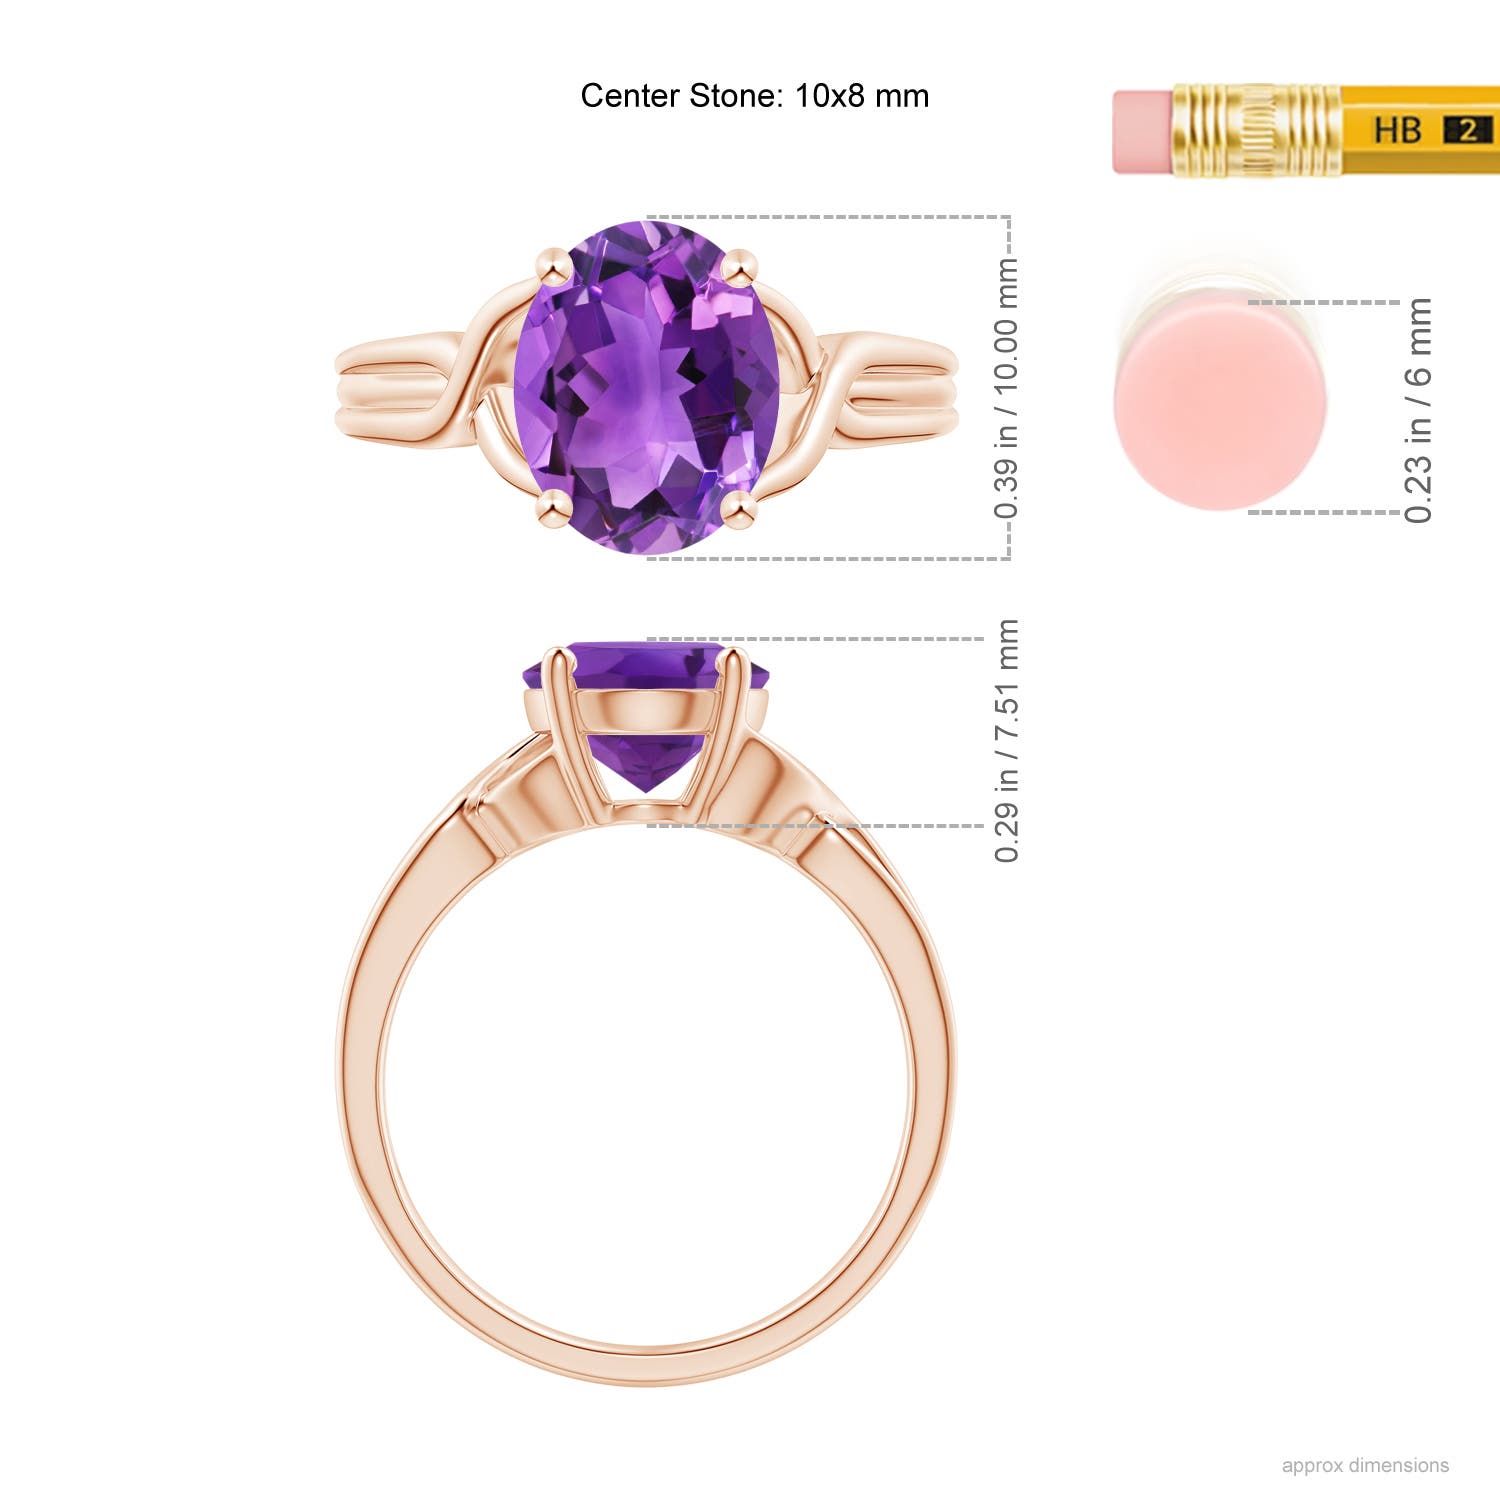 AAA - Amethyst / 2.28 CT / 14 KT Rose Gold